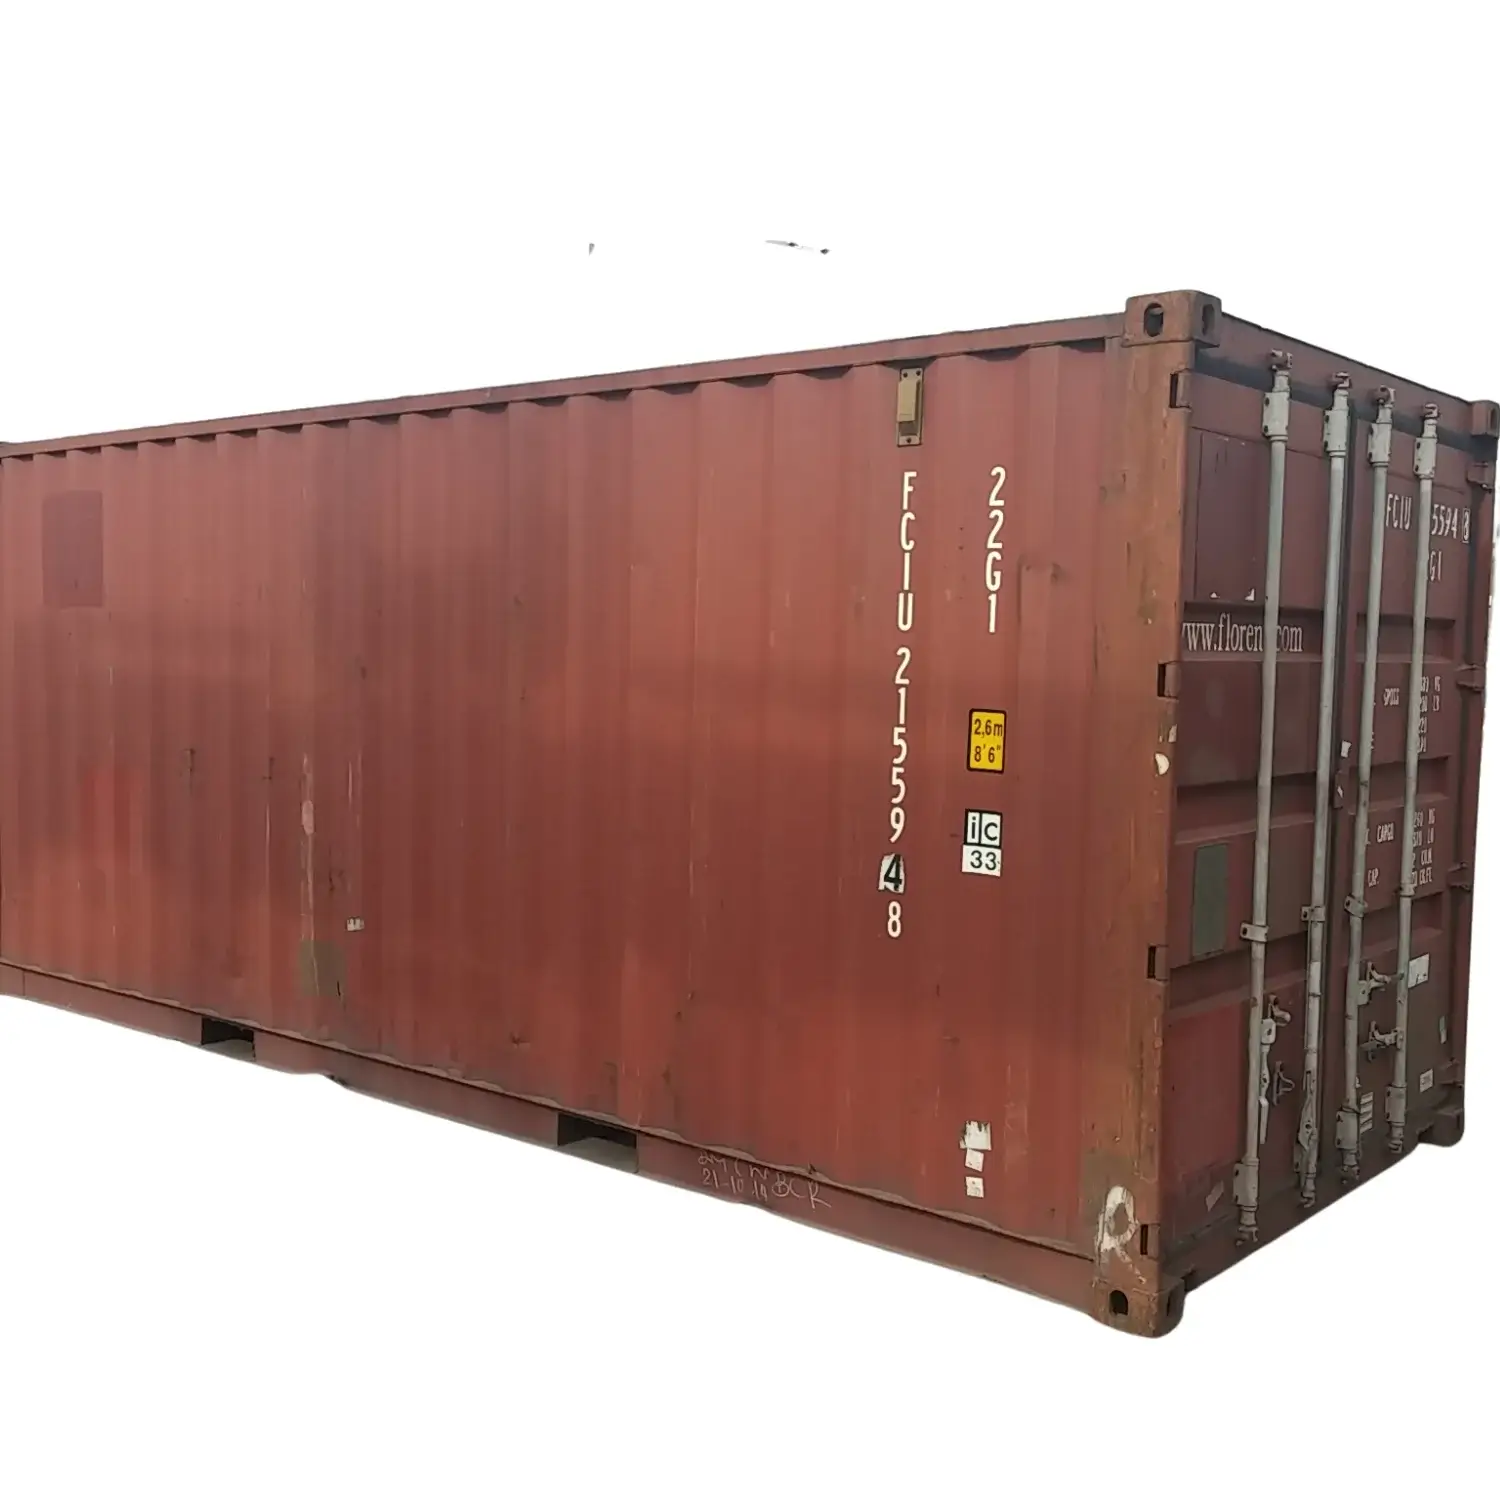 Shipping Containers / Storage Containers / Cargo Container – Cheap